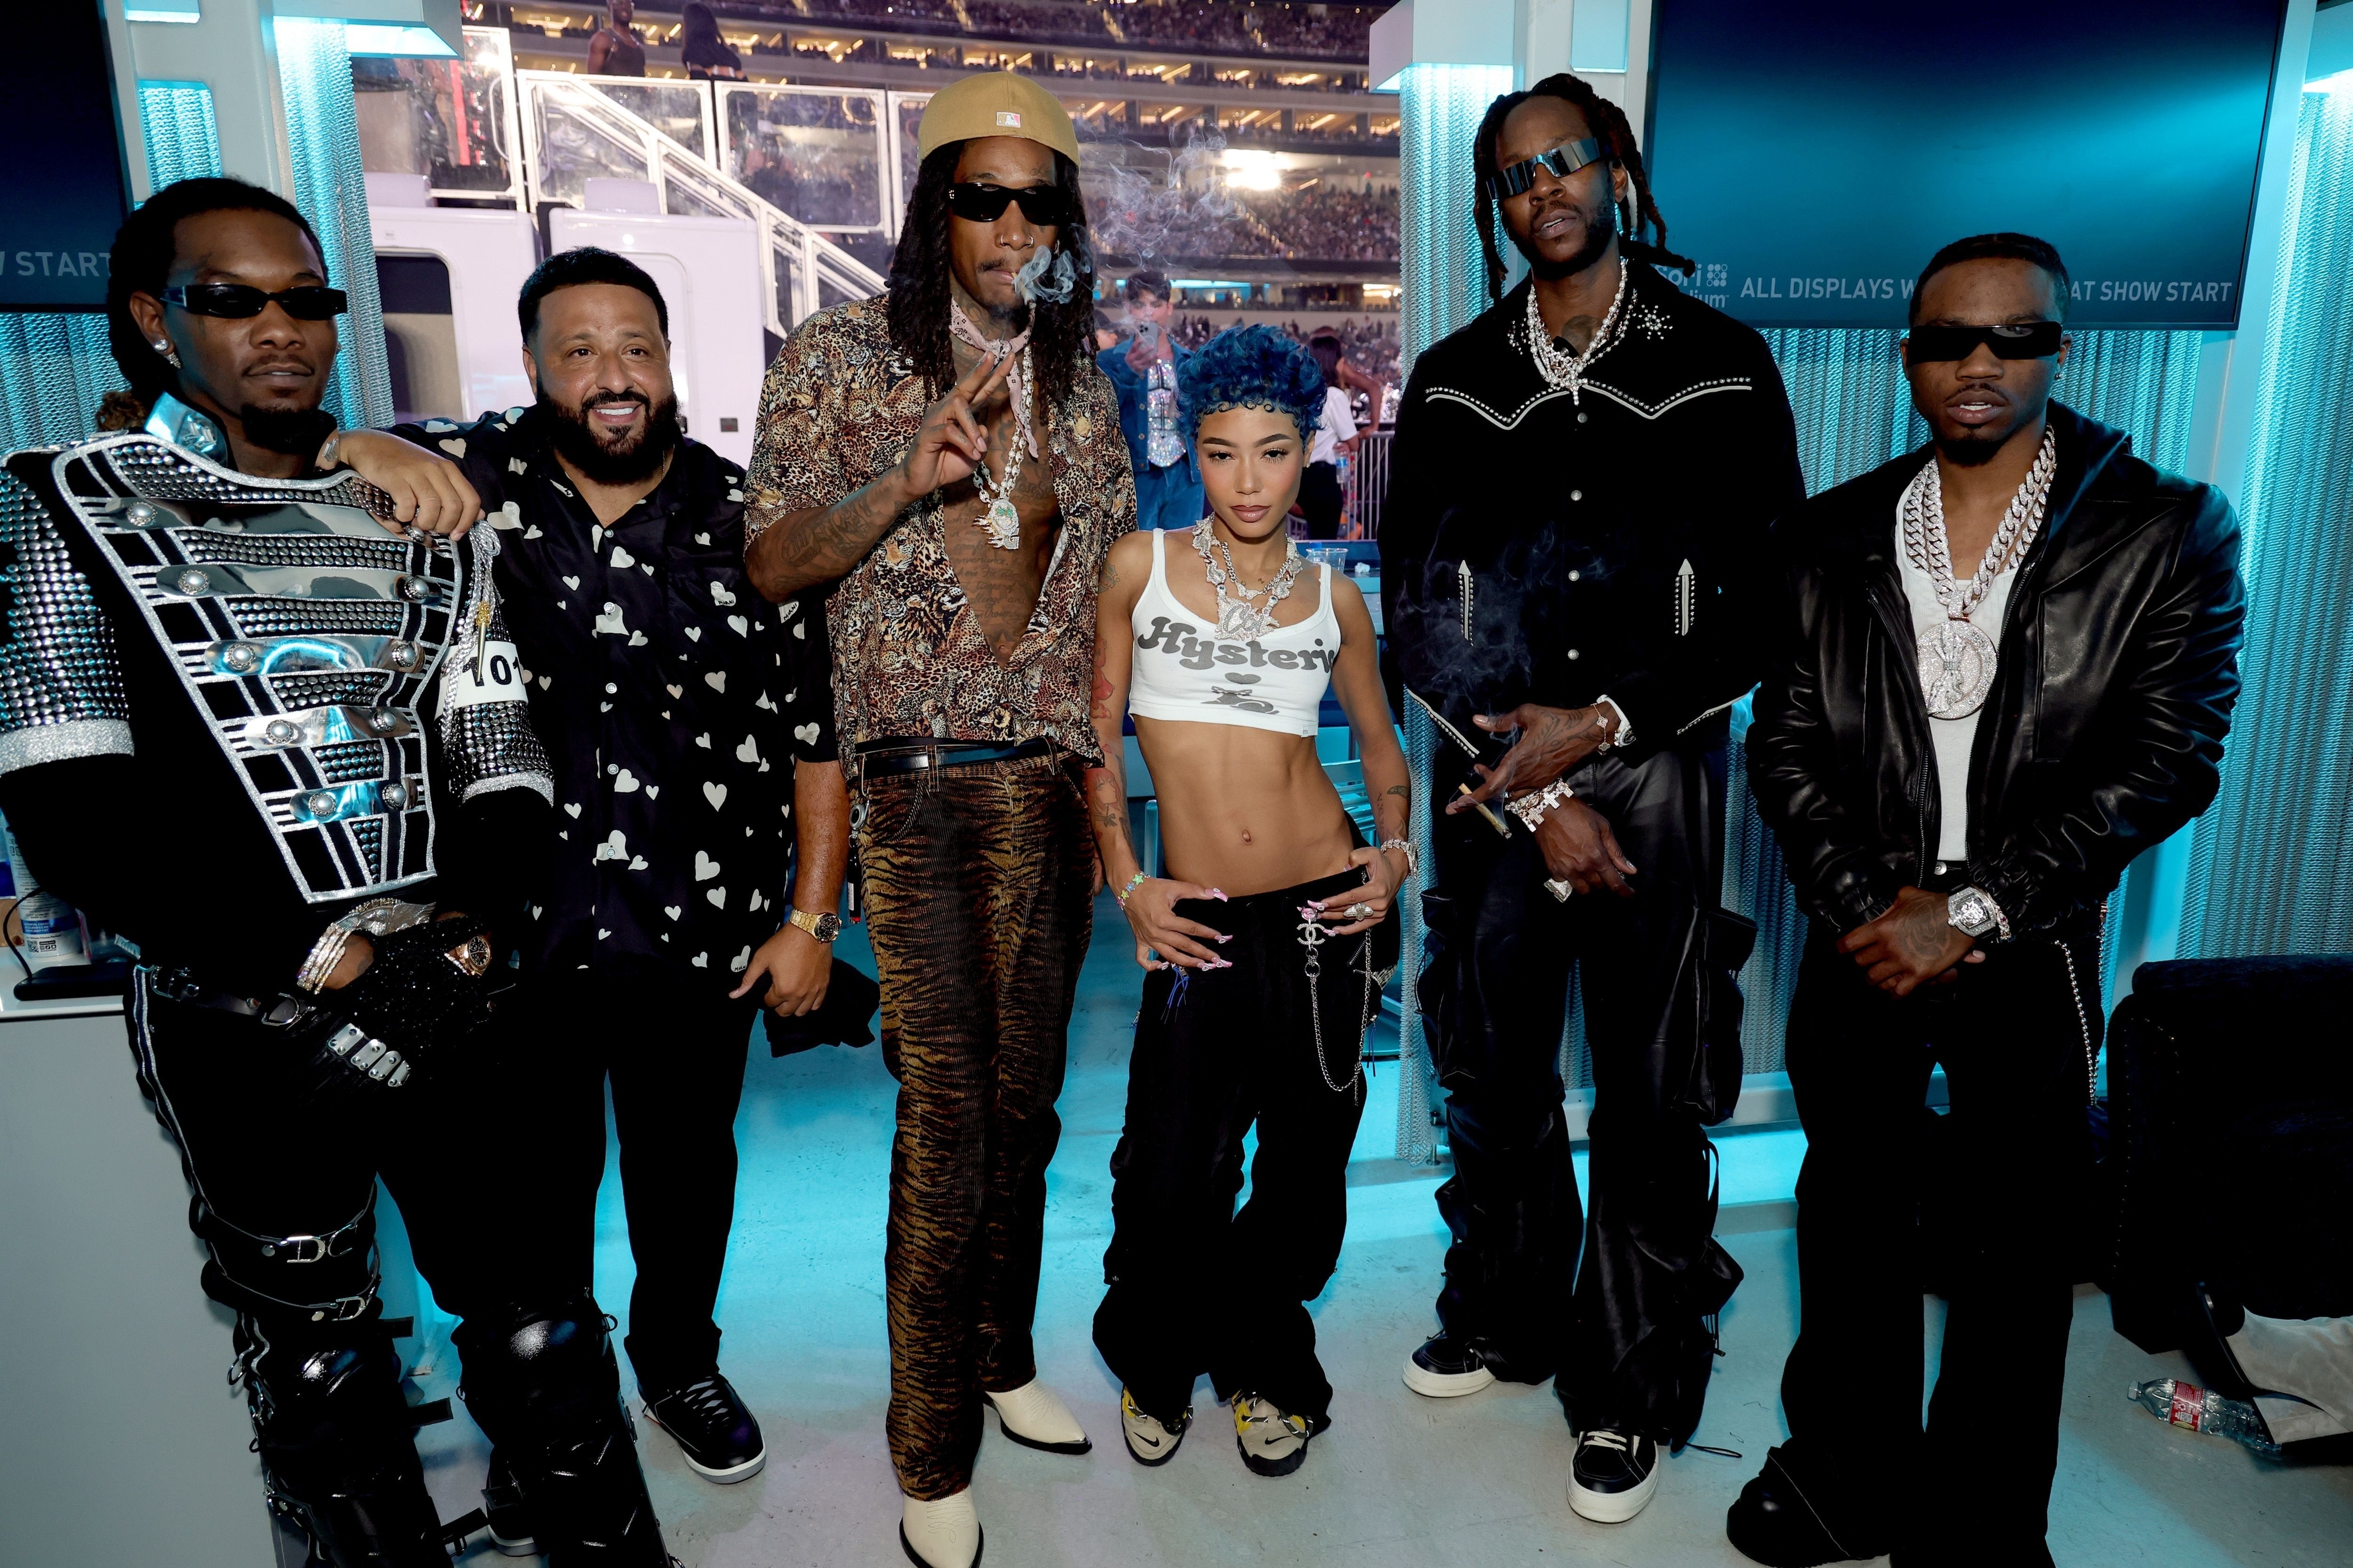 Coi Leray posing with others including Offset, DJ Khaled, and Wiz Kalifa